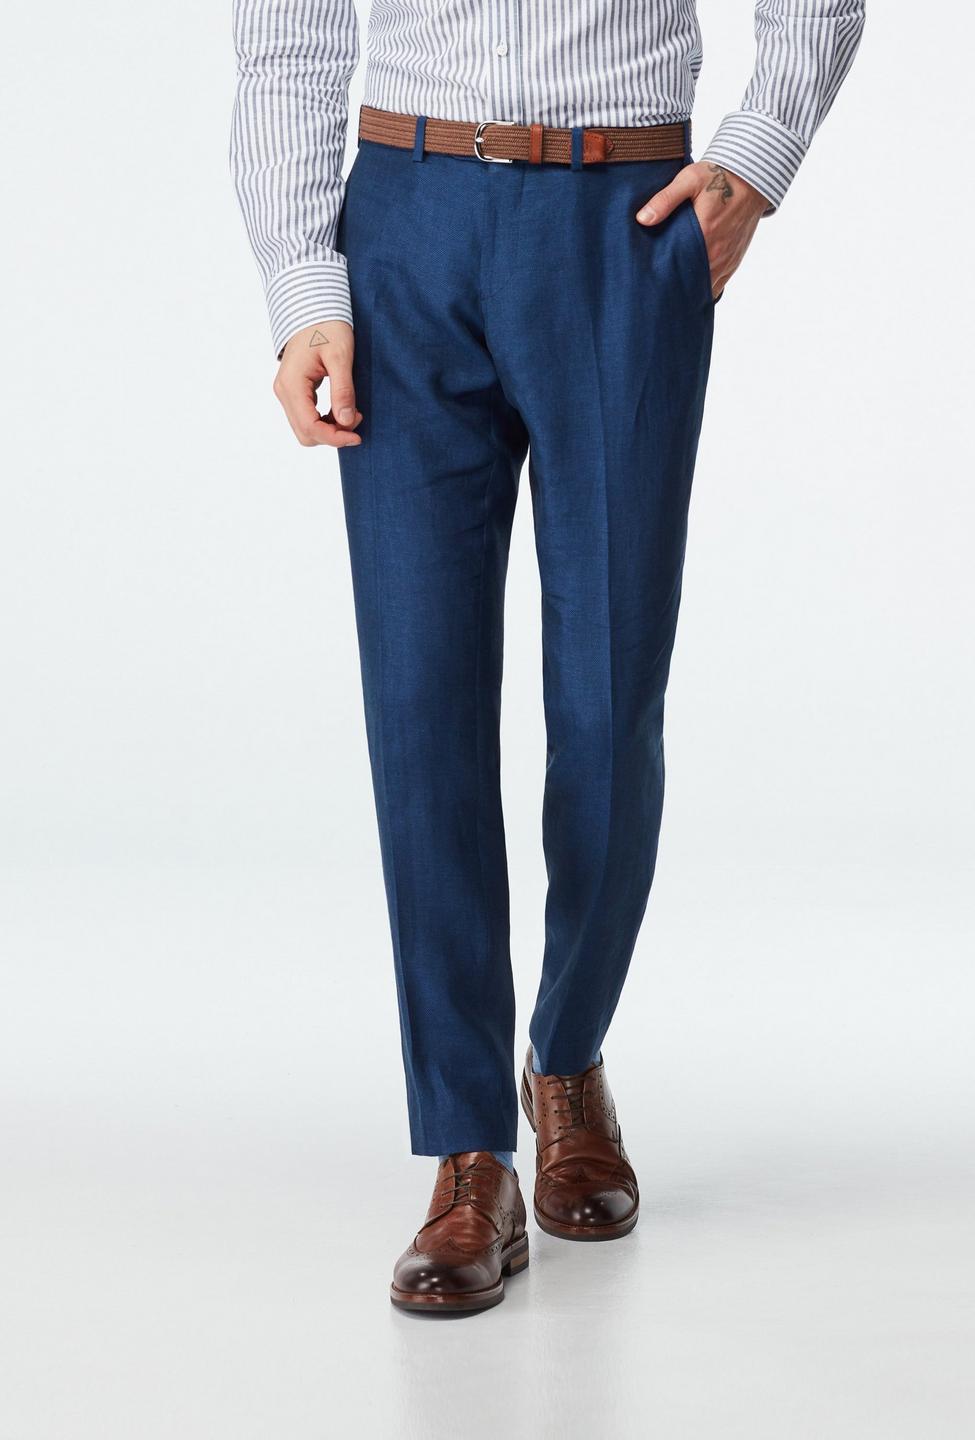 Blue pants - Sailsbury Solid Design from Seasonal Indochino Collection